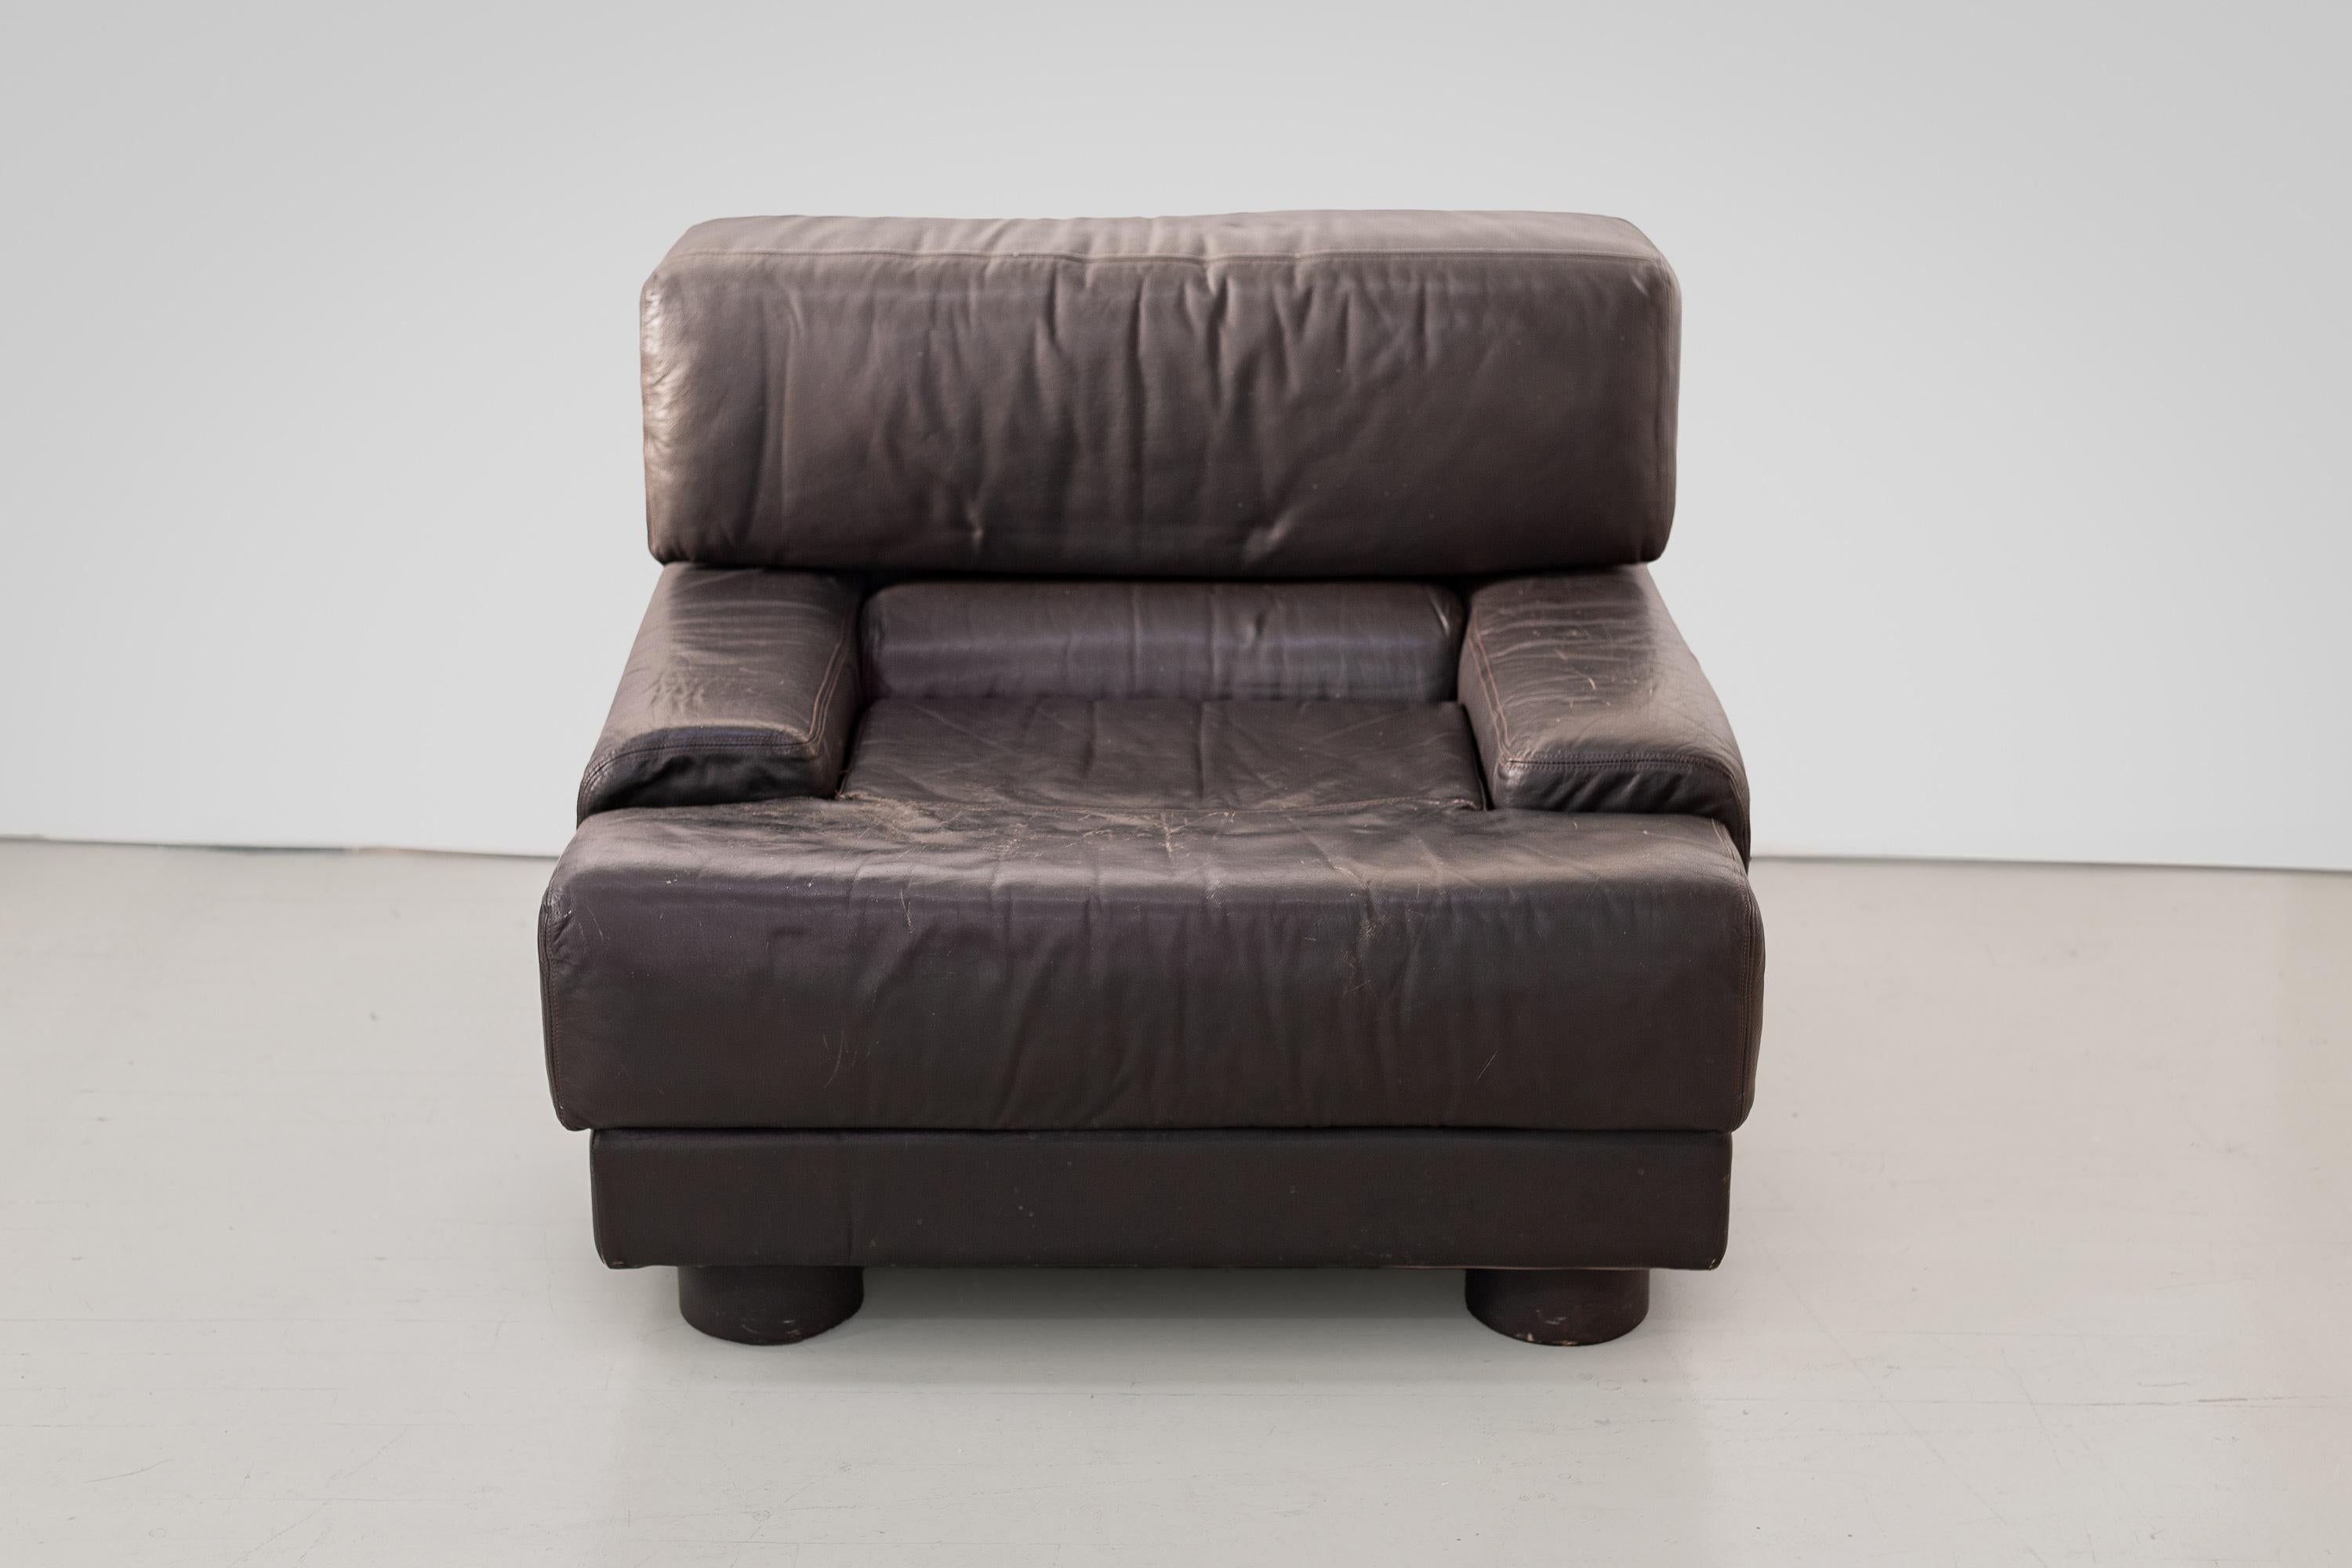 Gorgeous, rare Percival Lafer armchair made by Lafer S.A. in Sao Paolo, Brazil in dark chocolate brown leather. The front feet are rounded leather and the back legs are wheels, which are original. This is an extremely comfortable and supportive